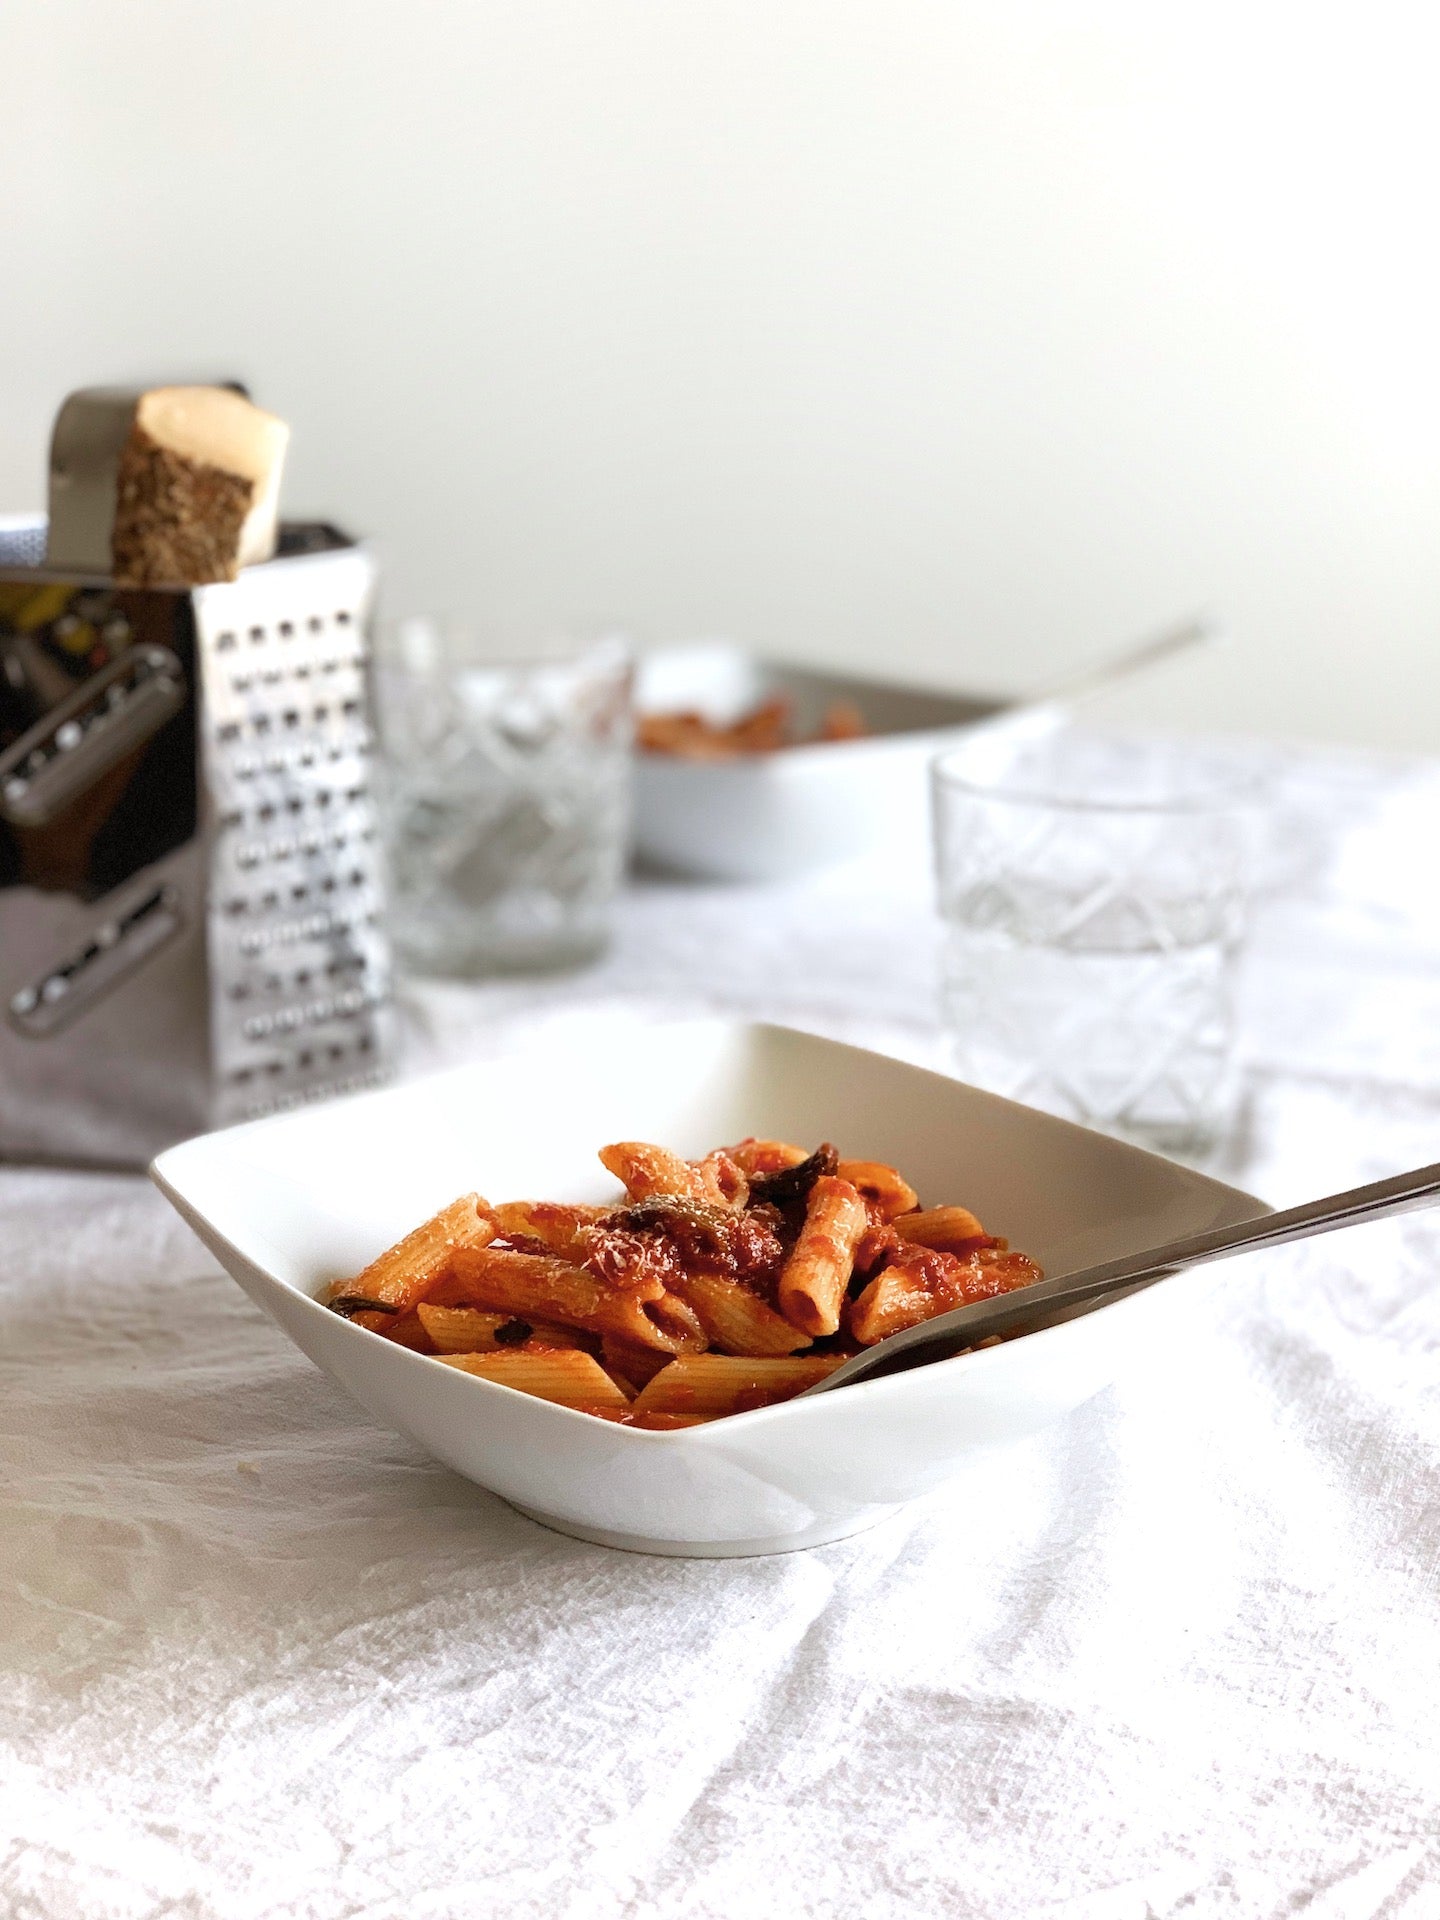 A quick pasta, with our new favourite sauce - Feast Italy